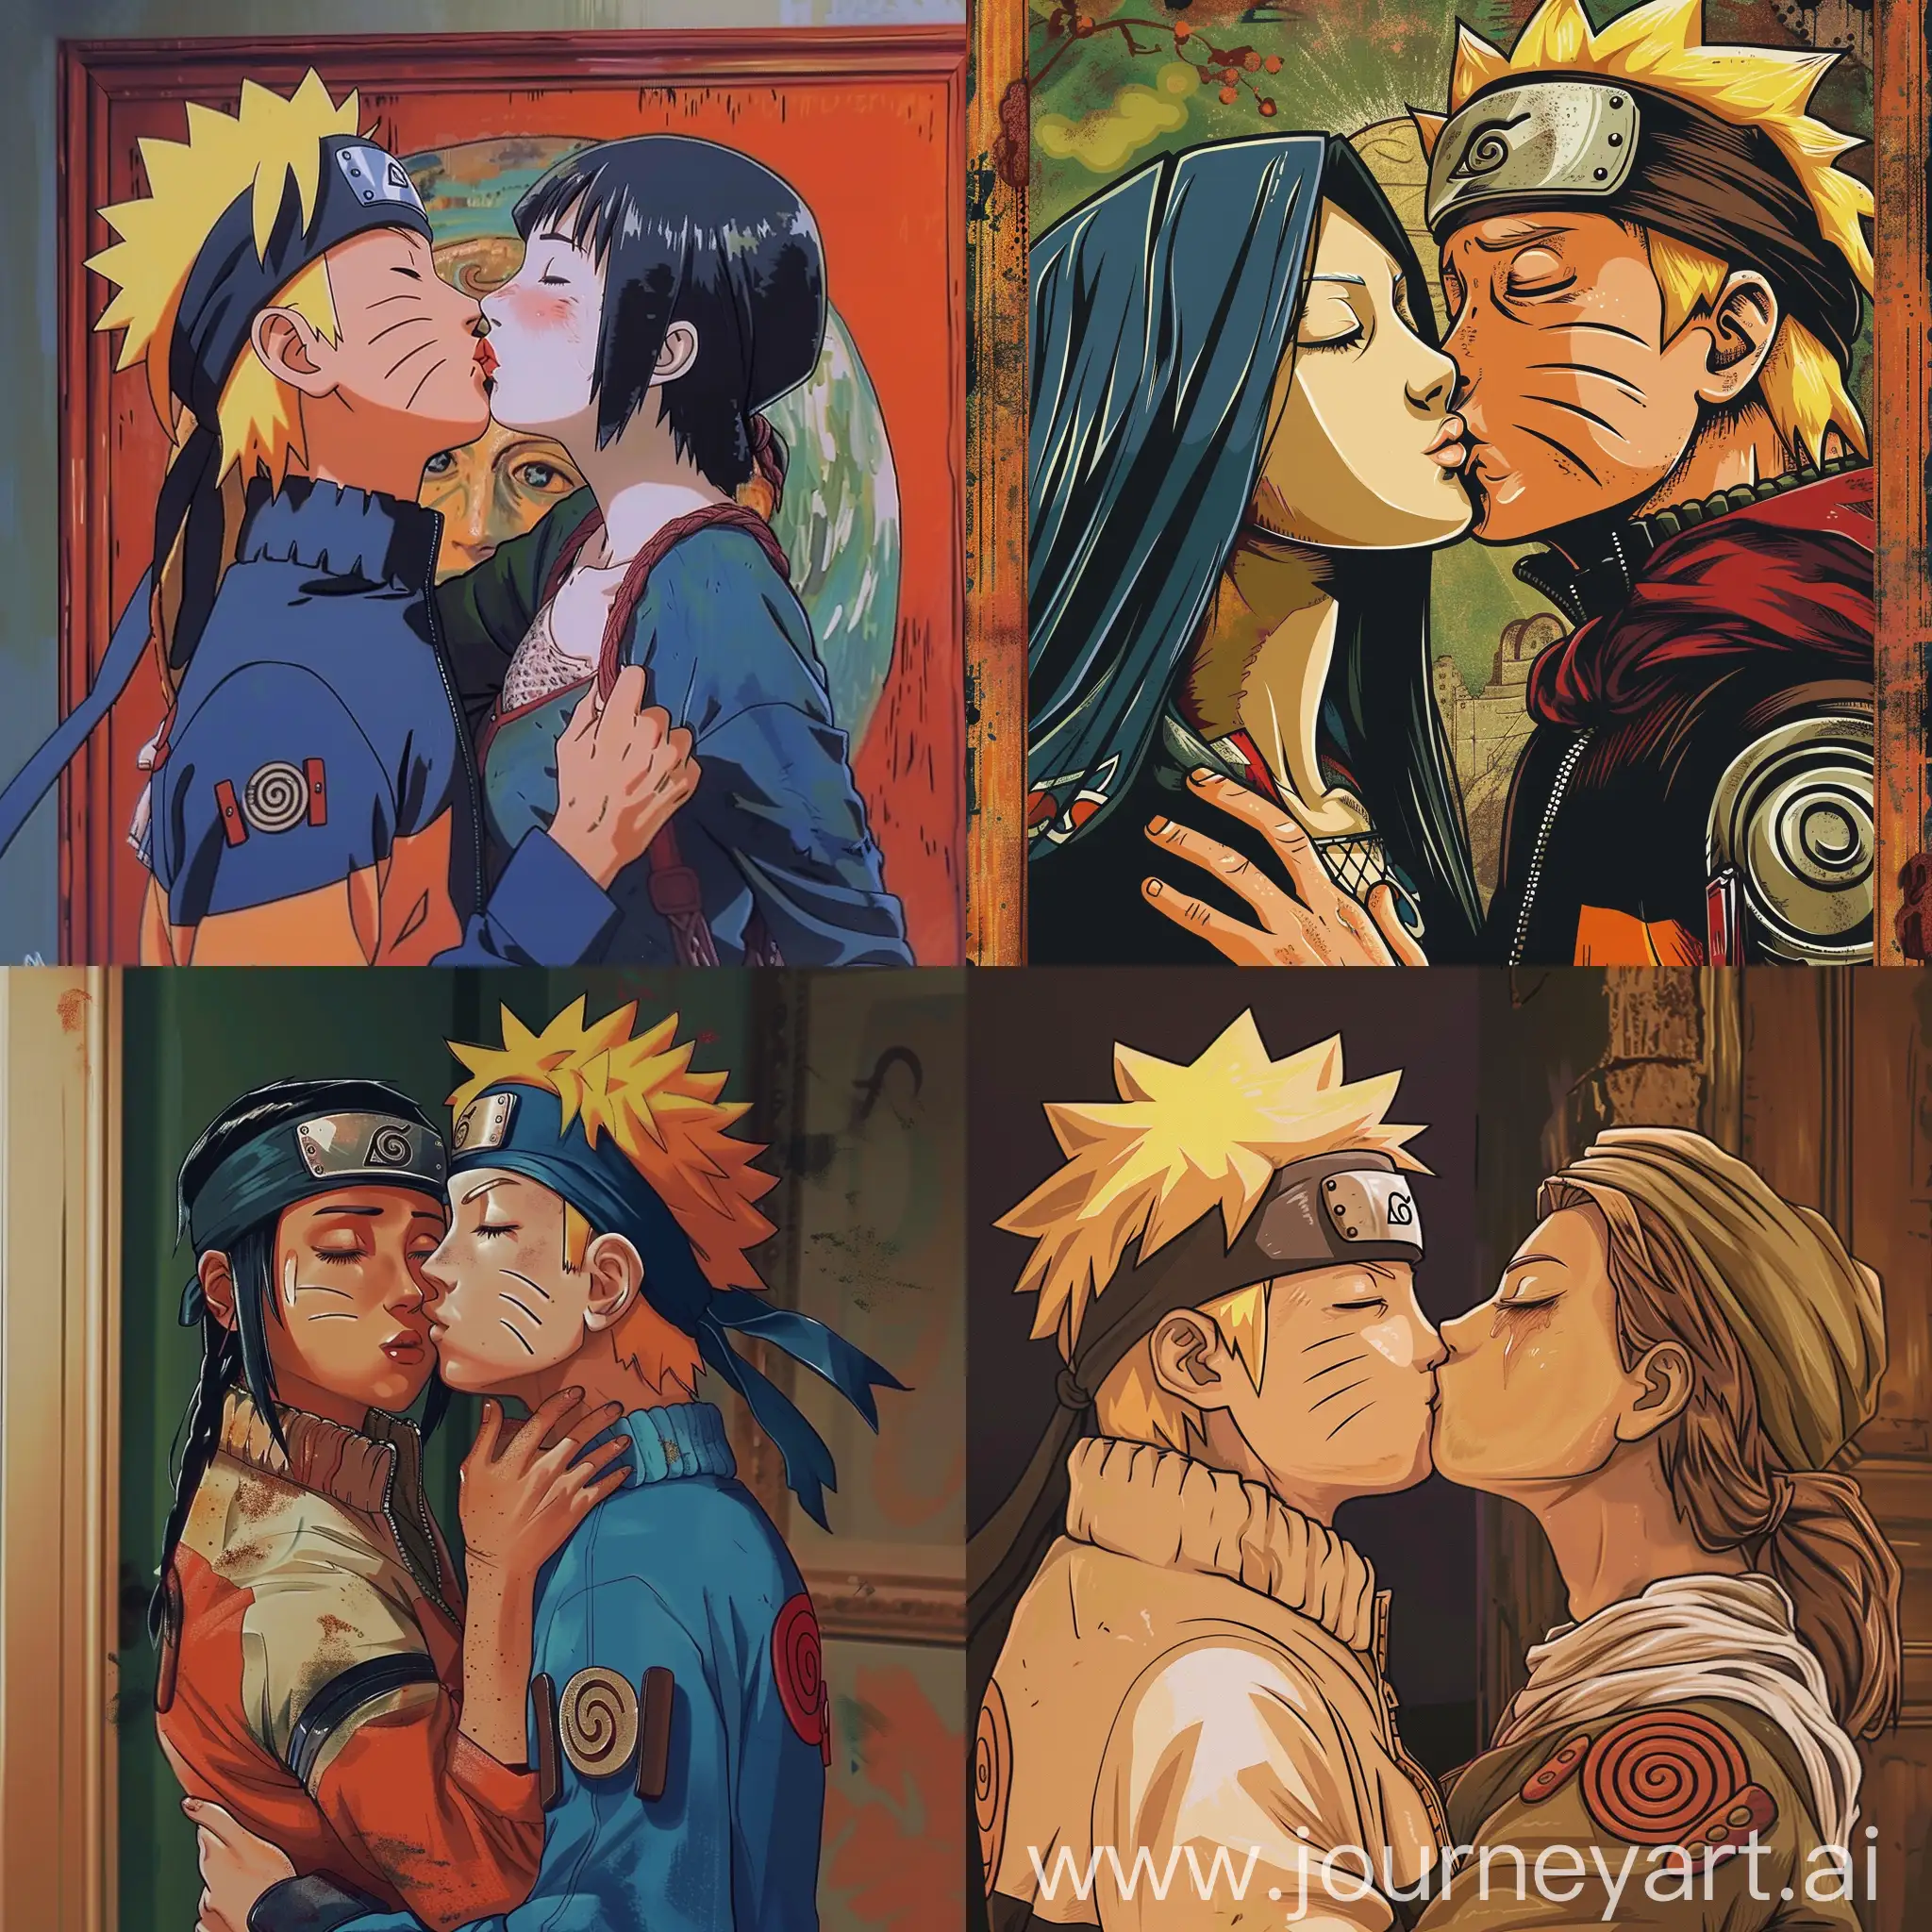 Naruto-Kissing-Mona-Lisa-Unexpected-Fusion-of-Iconic-Art-and-Pop-Culture